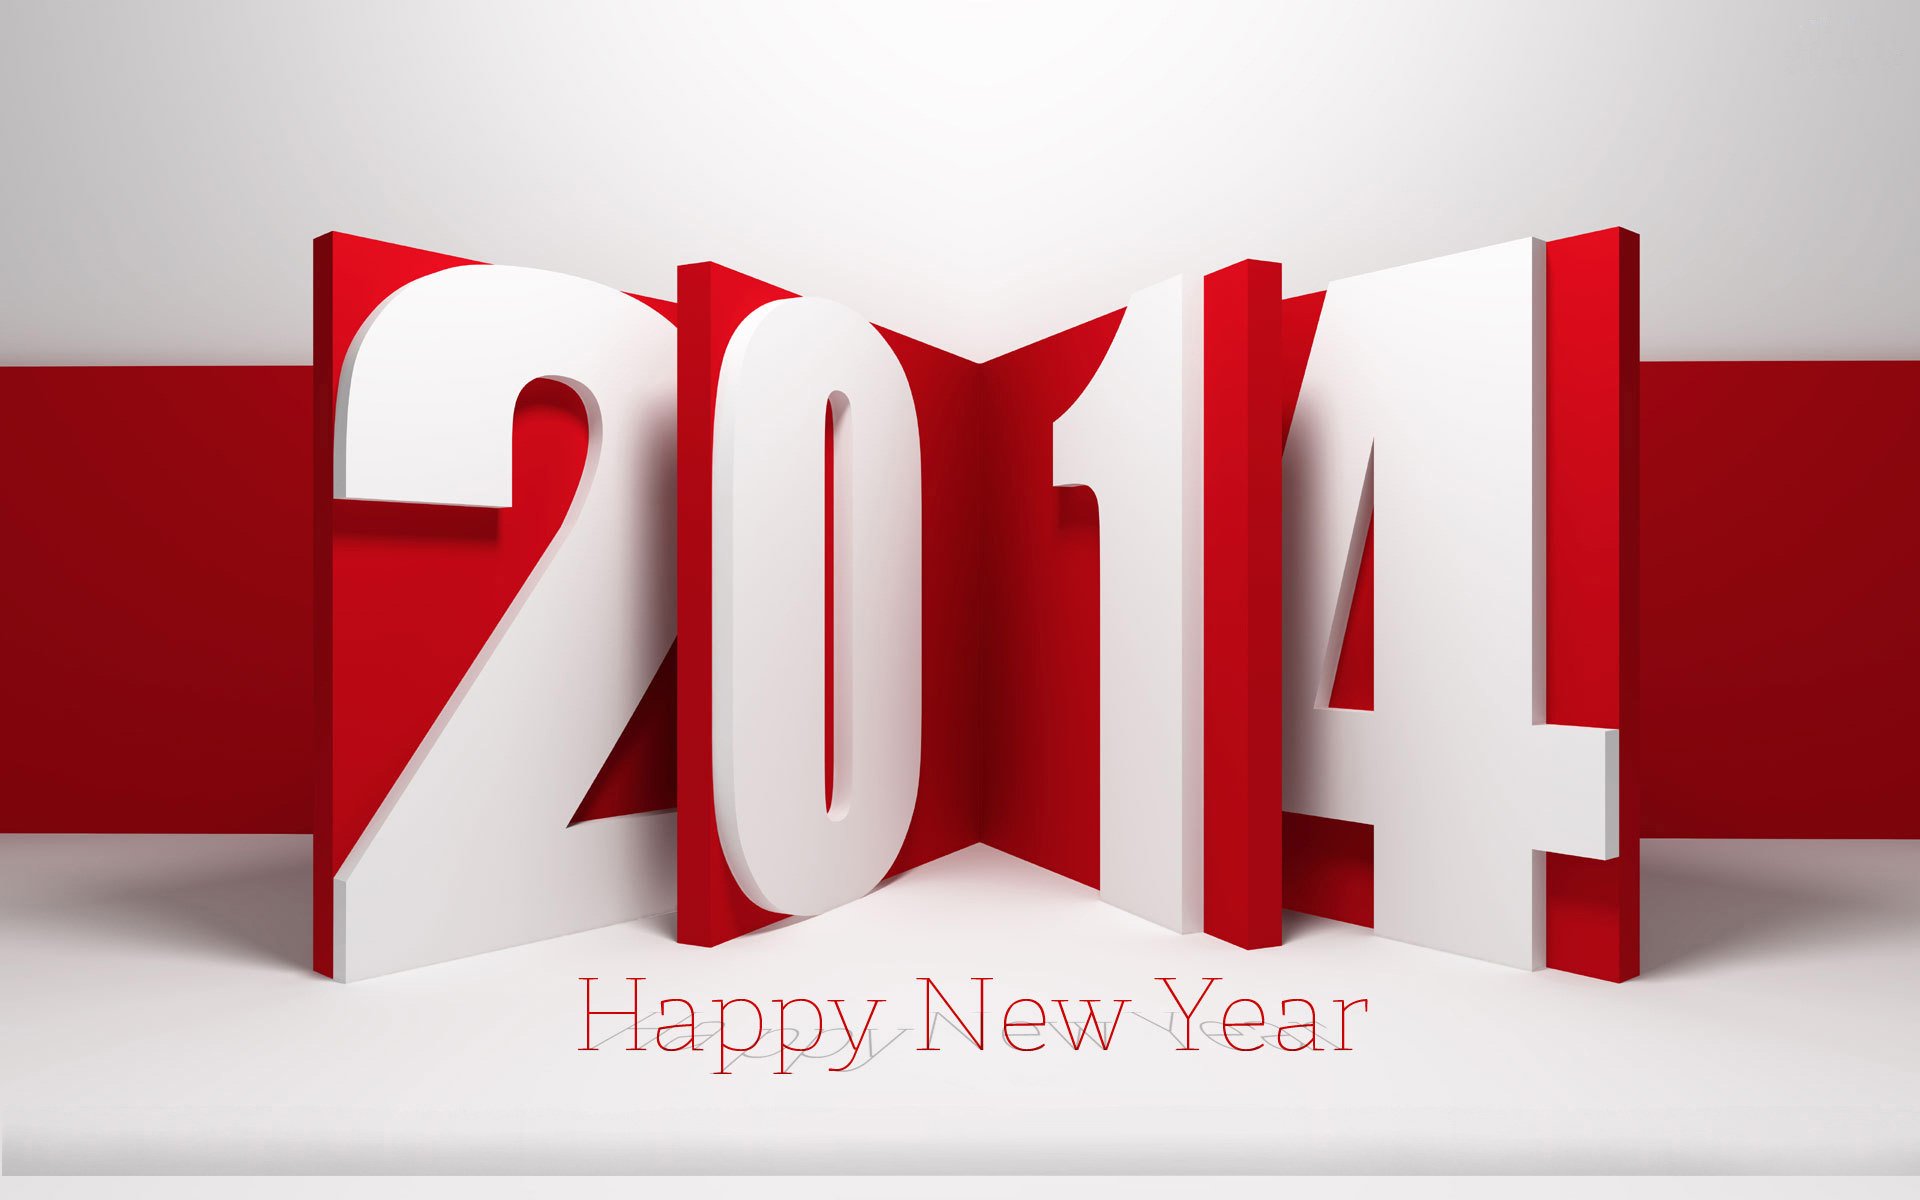 Happy New Year 2014 Wallpaper, Images & Facebook Cover photos